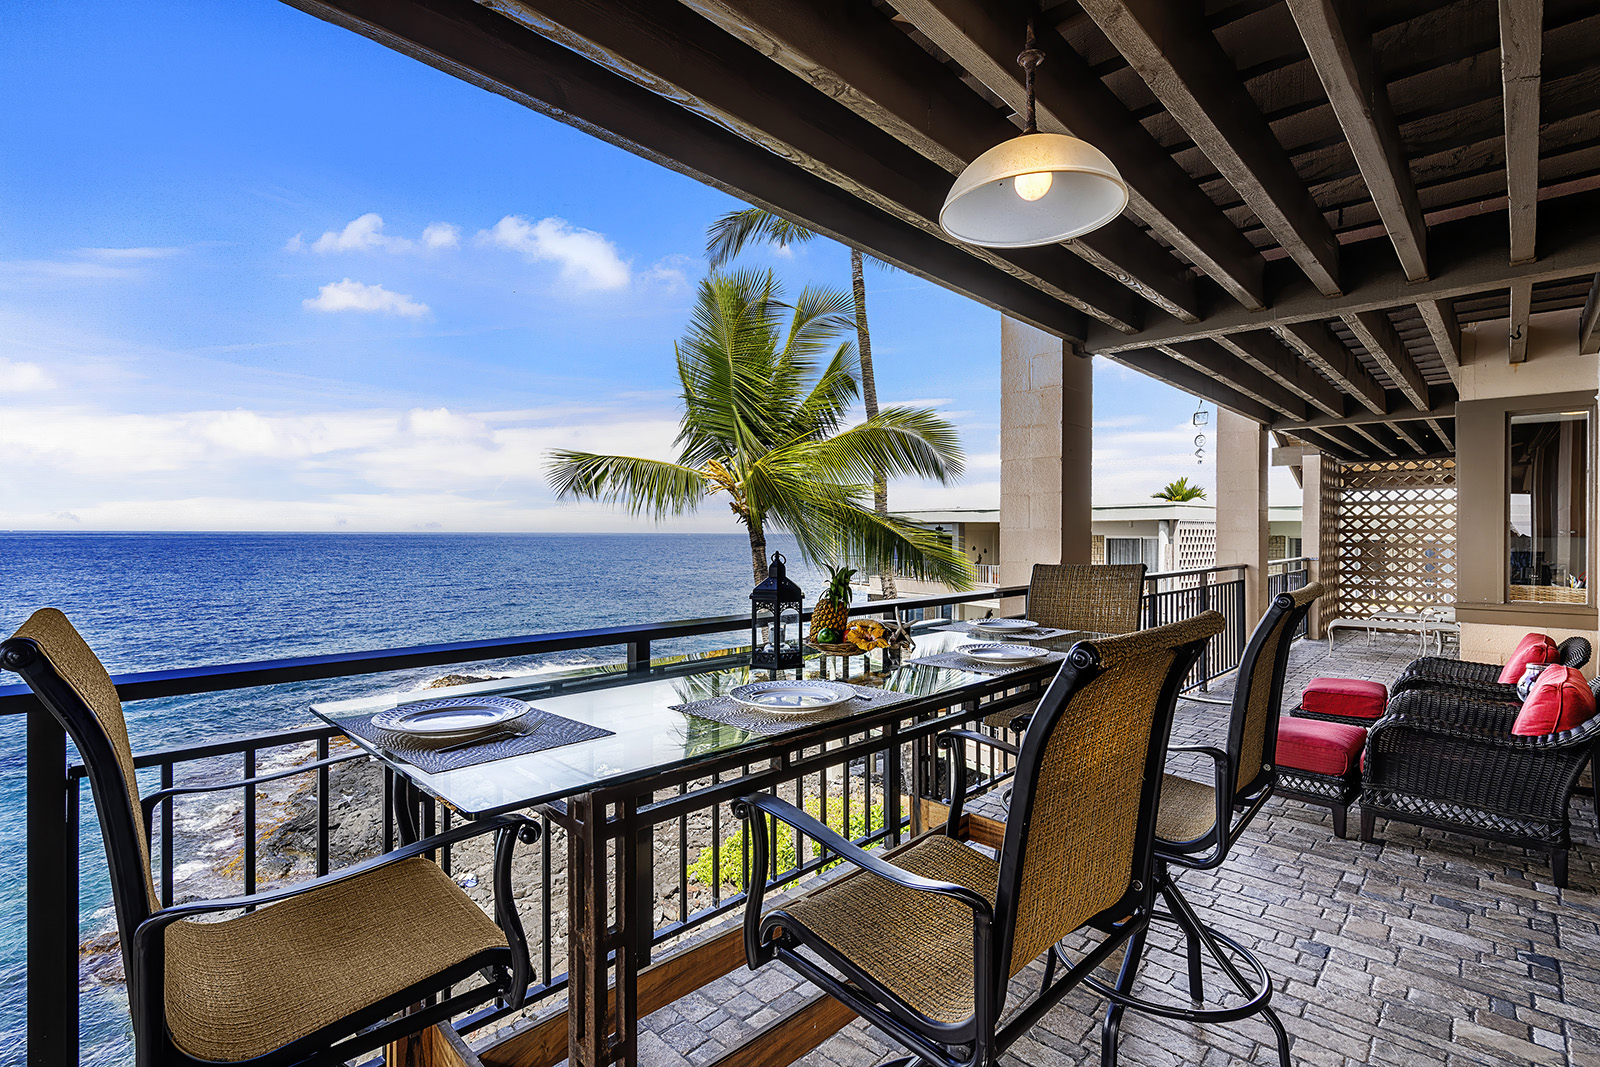 Dine on the ocean daily in this top floor condo!